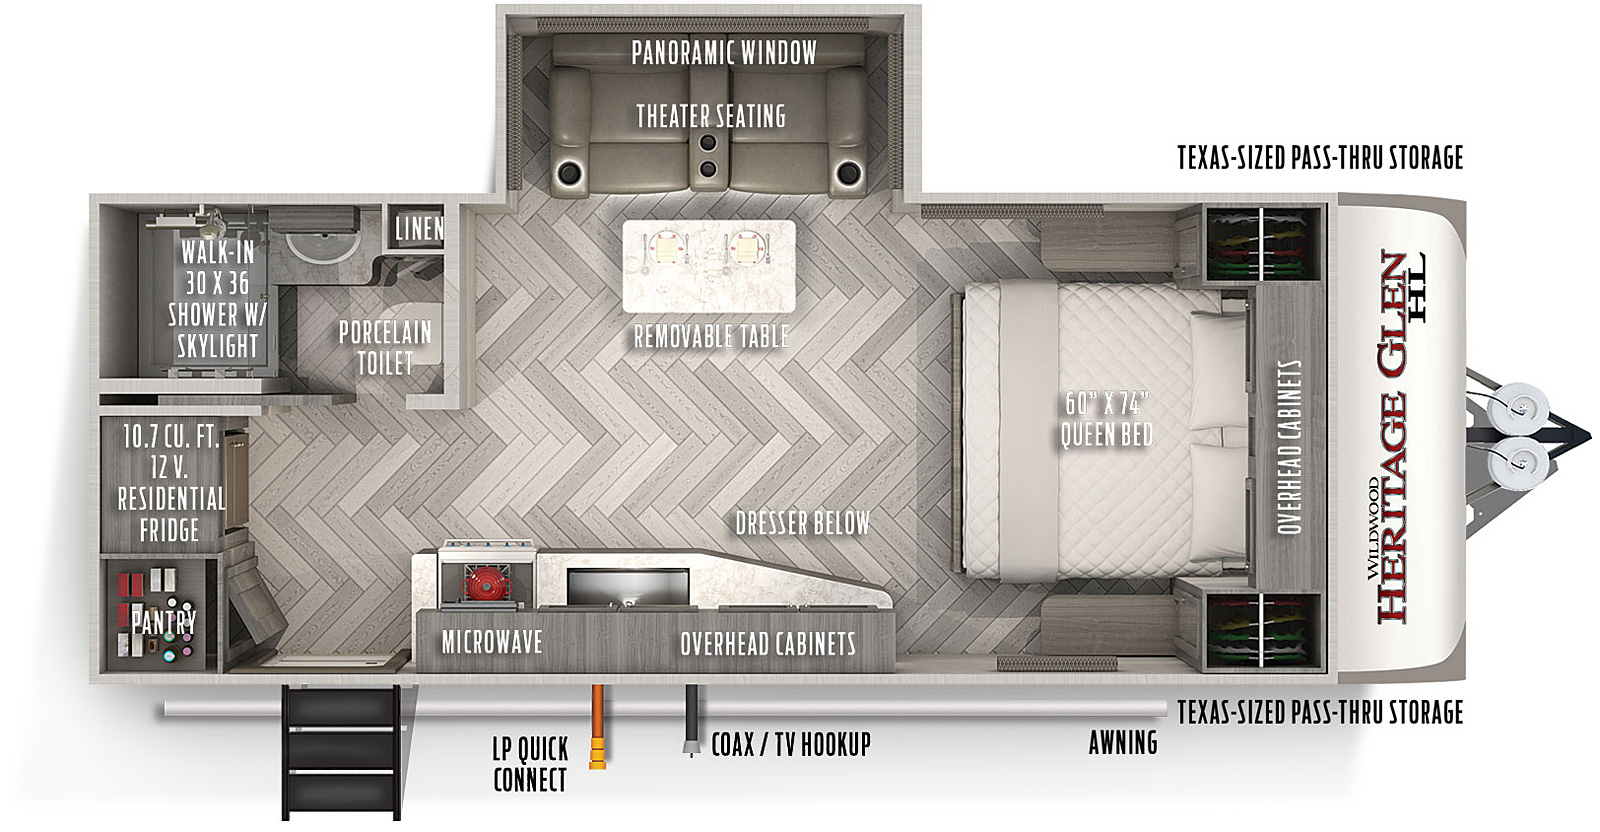 Heritage Glen Hyper-Lyte 19RBHL floorplan. The 19RBHL has one slide out and one entry door.